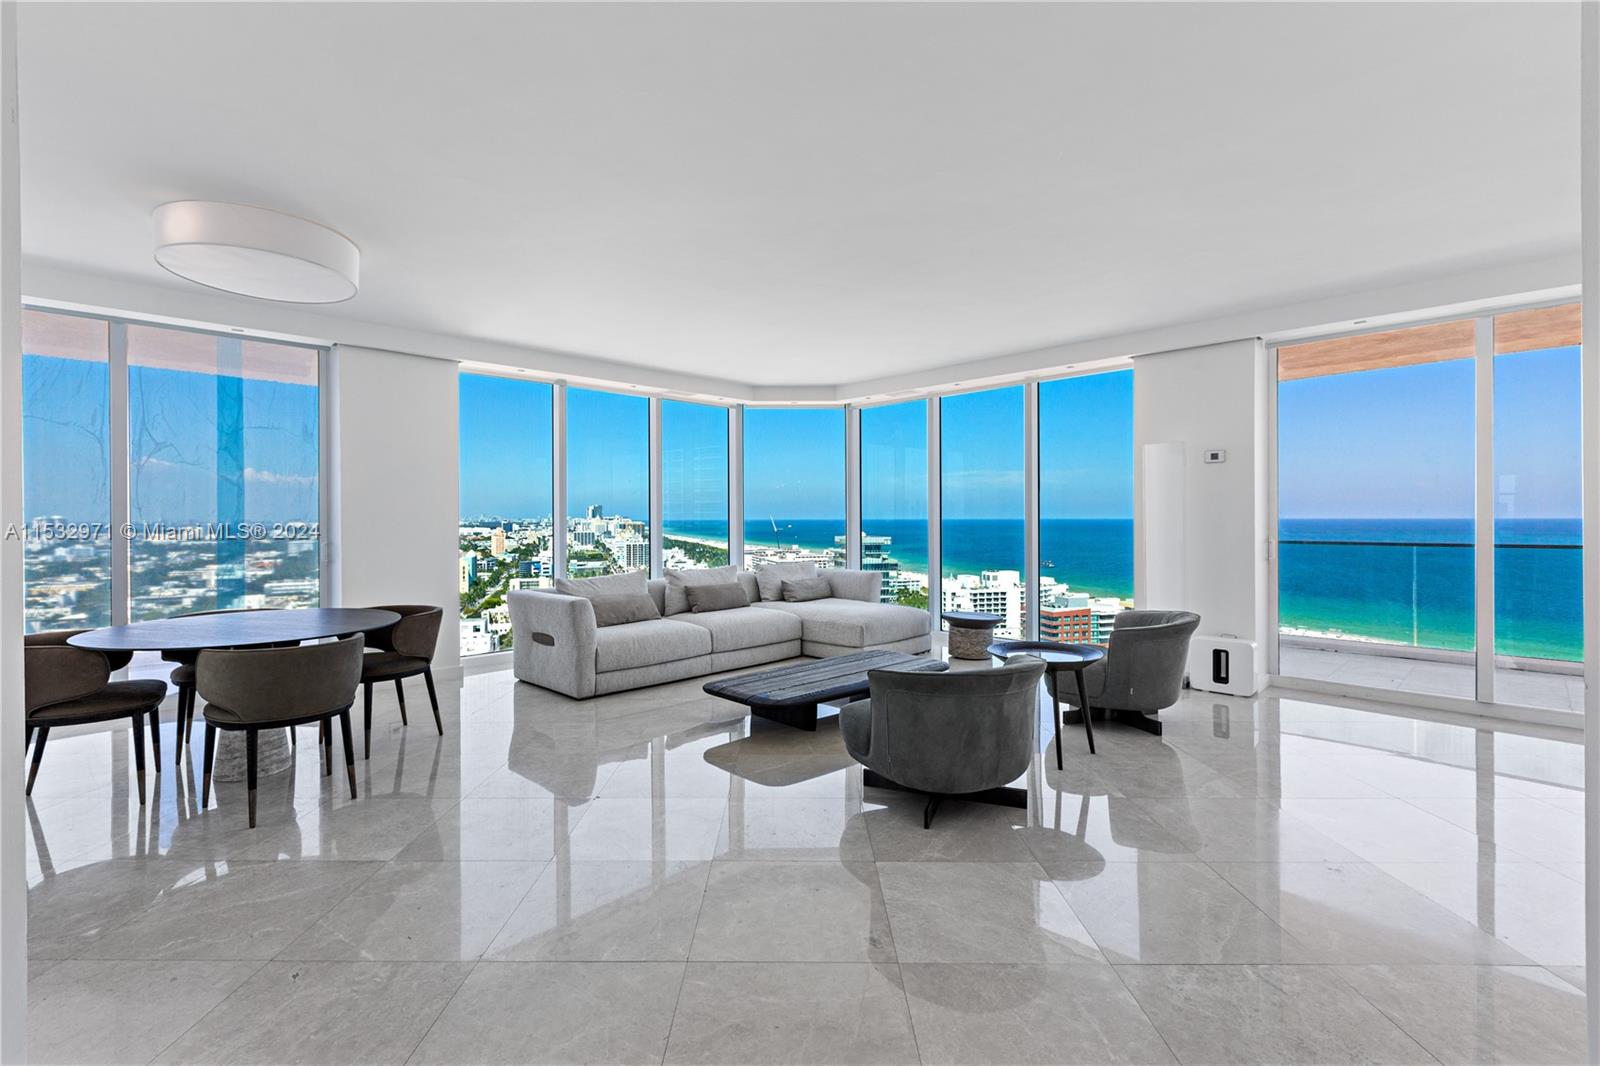 Completely renovated 3 Bed + 2.5 Bath corner residence at the prestigious Portofino Tower in the exclusive South of 5th Neighborhood. This immaculate residence offers incredible 270 degree panoramic views day and night of the Ocean, South Beach, Miami Skyline and Government Cut as cruise ships continuously sail by, all from floor to ceiling glass. This residence demonstrates the epitome of luxury with a custom kitchen with an extended eat-in island with views of the Ocean, remodeled bathrooms featuring a Master Bath with a free standing soaking tub with Ocean views, separate expansive shower and dual sinks. Marble floors, recessed lighting, linear diffusers, custom doors, intelligently integrated built-ins & electric window treatments. No detail has been overlooked. Fully furnished.